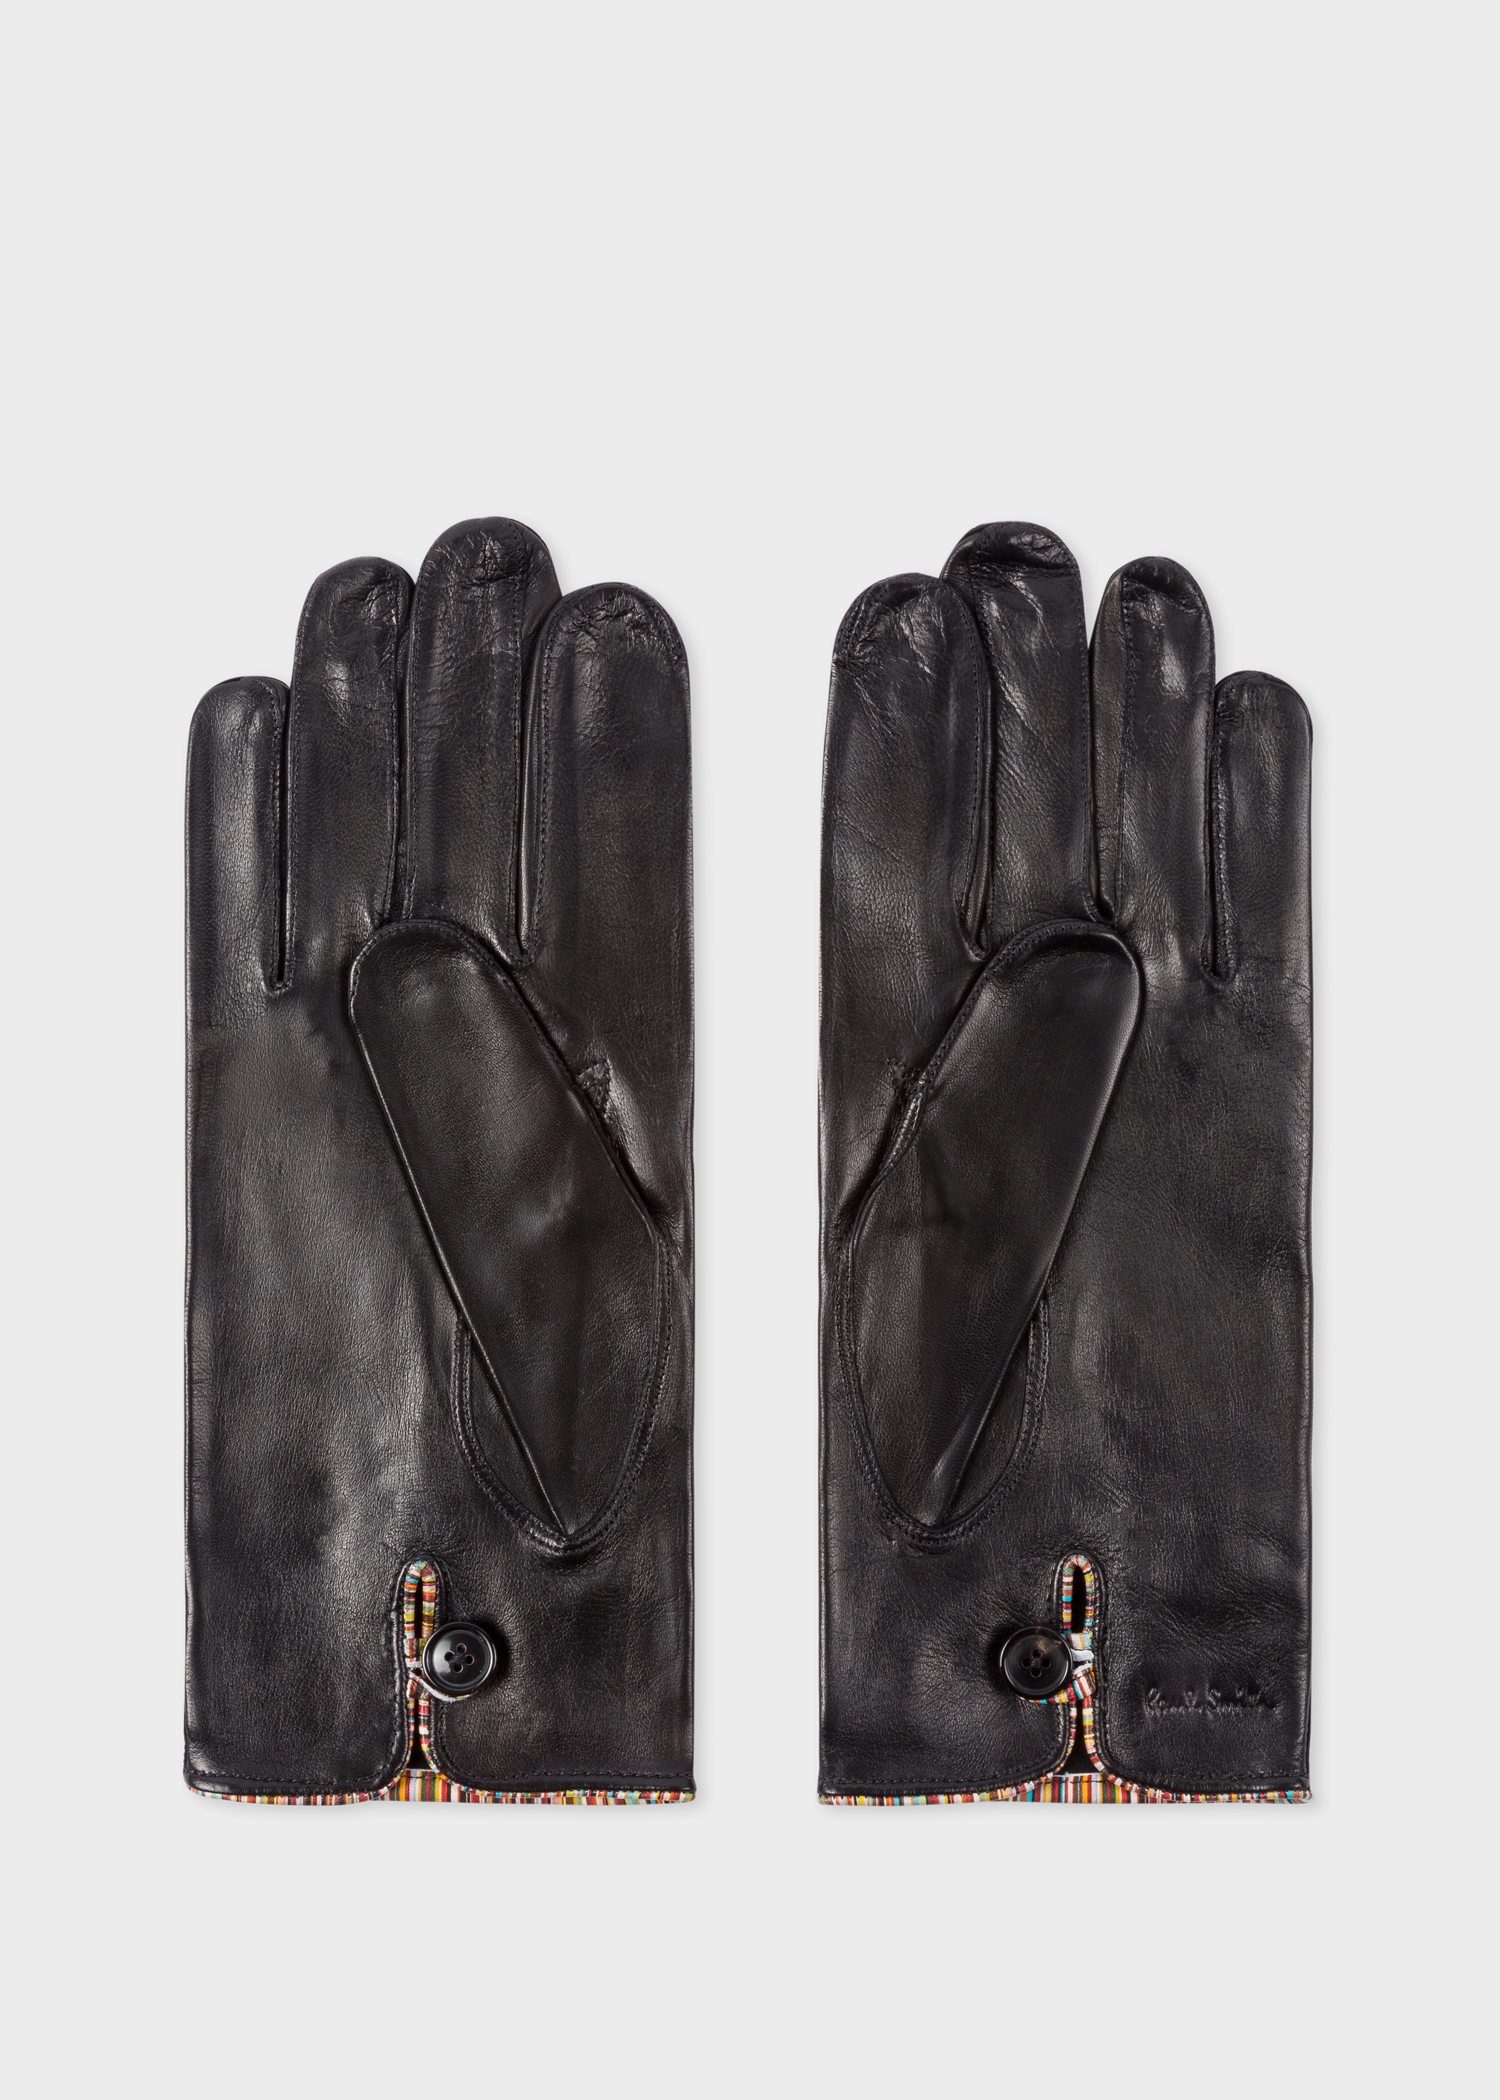 Back view - Men's Black Leather Gloves With 'Signature Stripe' Piping Paul Smith